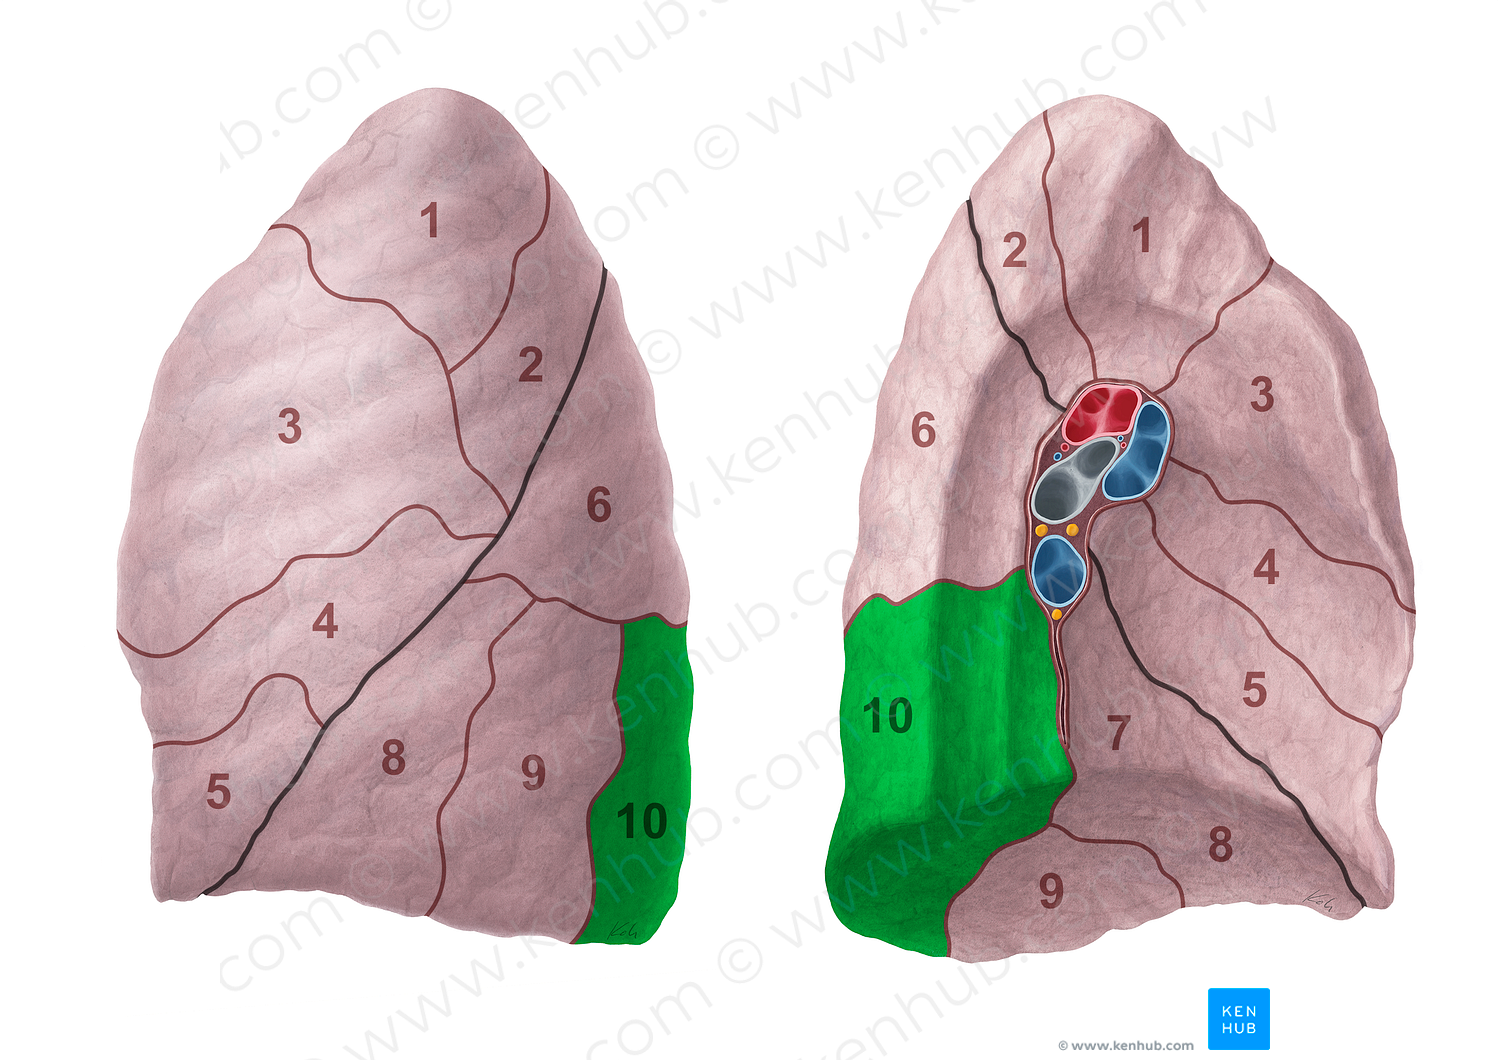 Posterior basal segment of left lung (#20704)